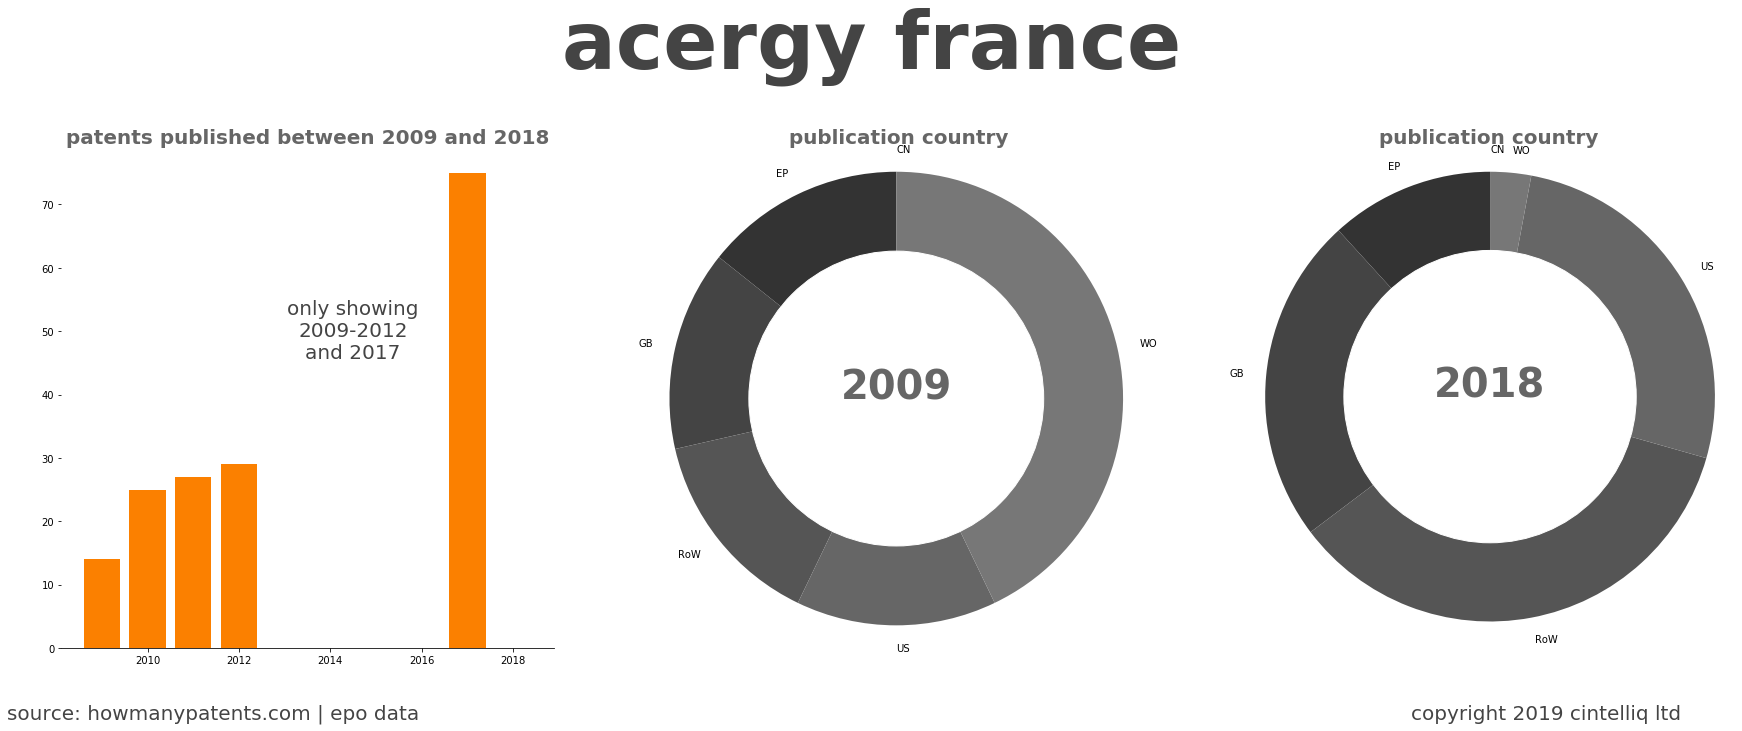 summary of patents for Acergy France